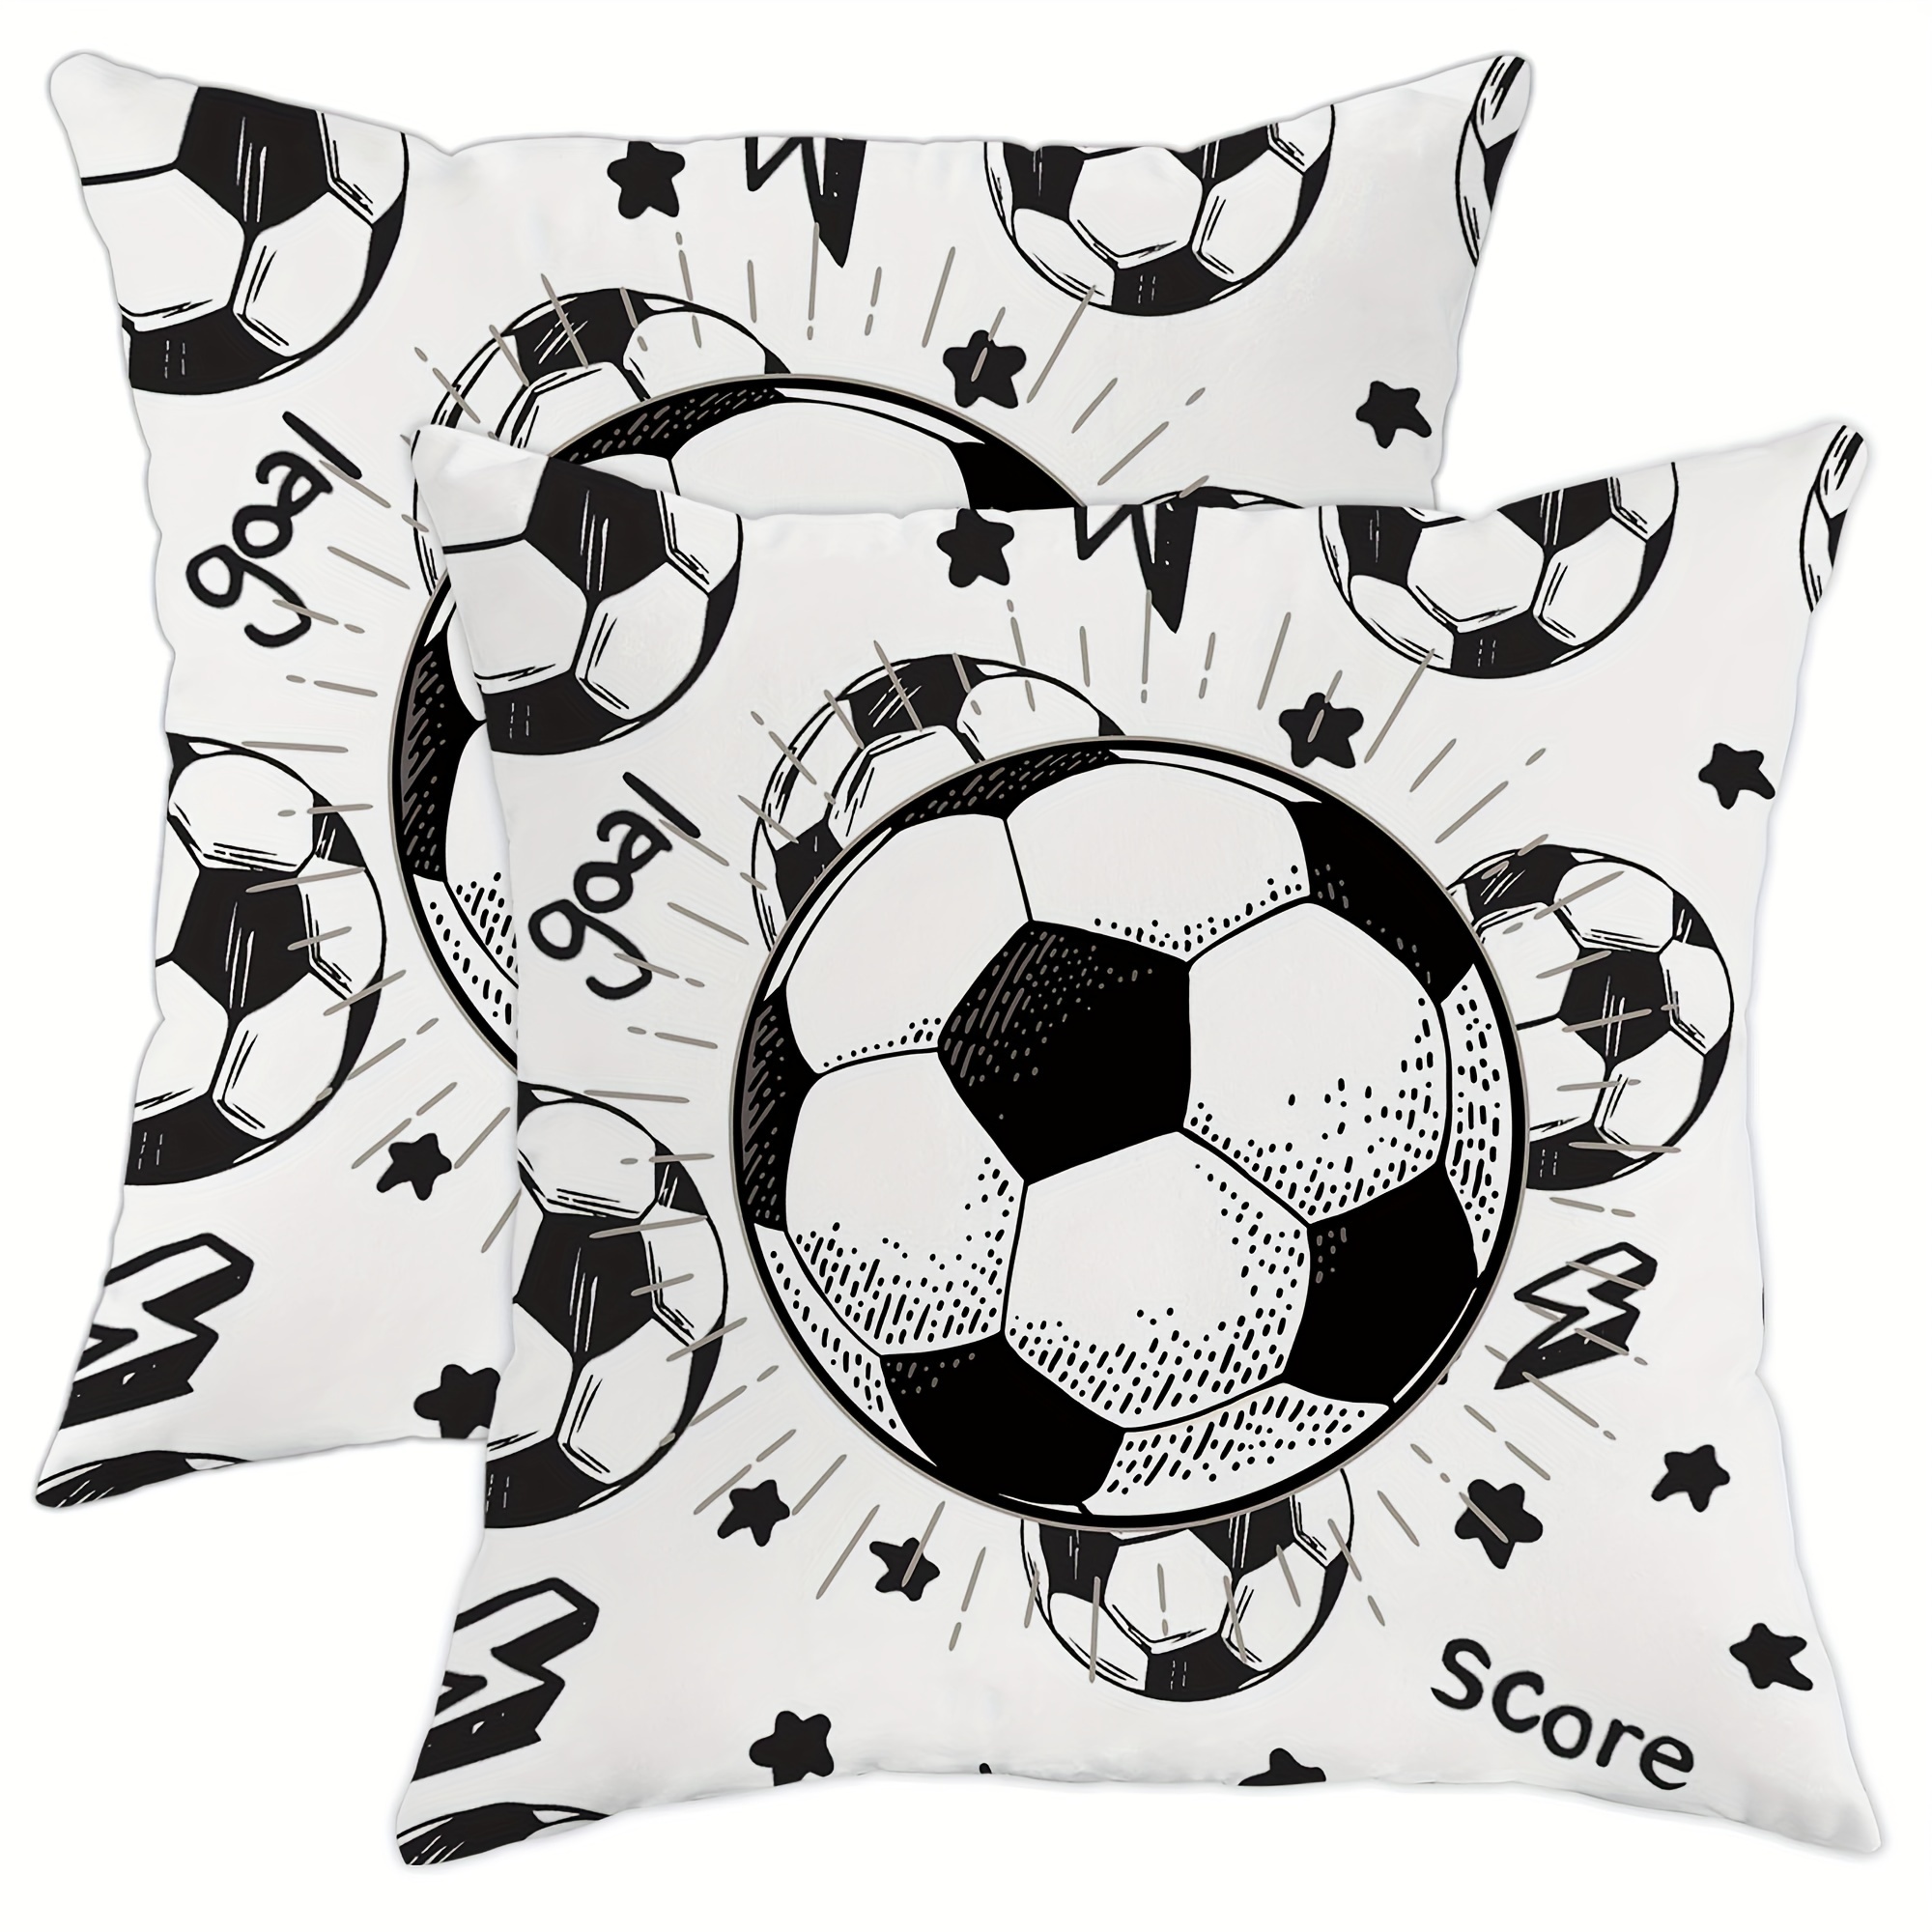 

2pcs Football Cartoon Pattern 18x18 Inches Short Plush Throw Pillow Covers, Soccer Star Design, Cute White Decorative Cushion Covers For Living Room Sofa Chair, Square, No Insert